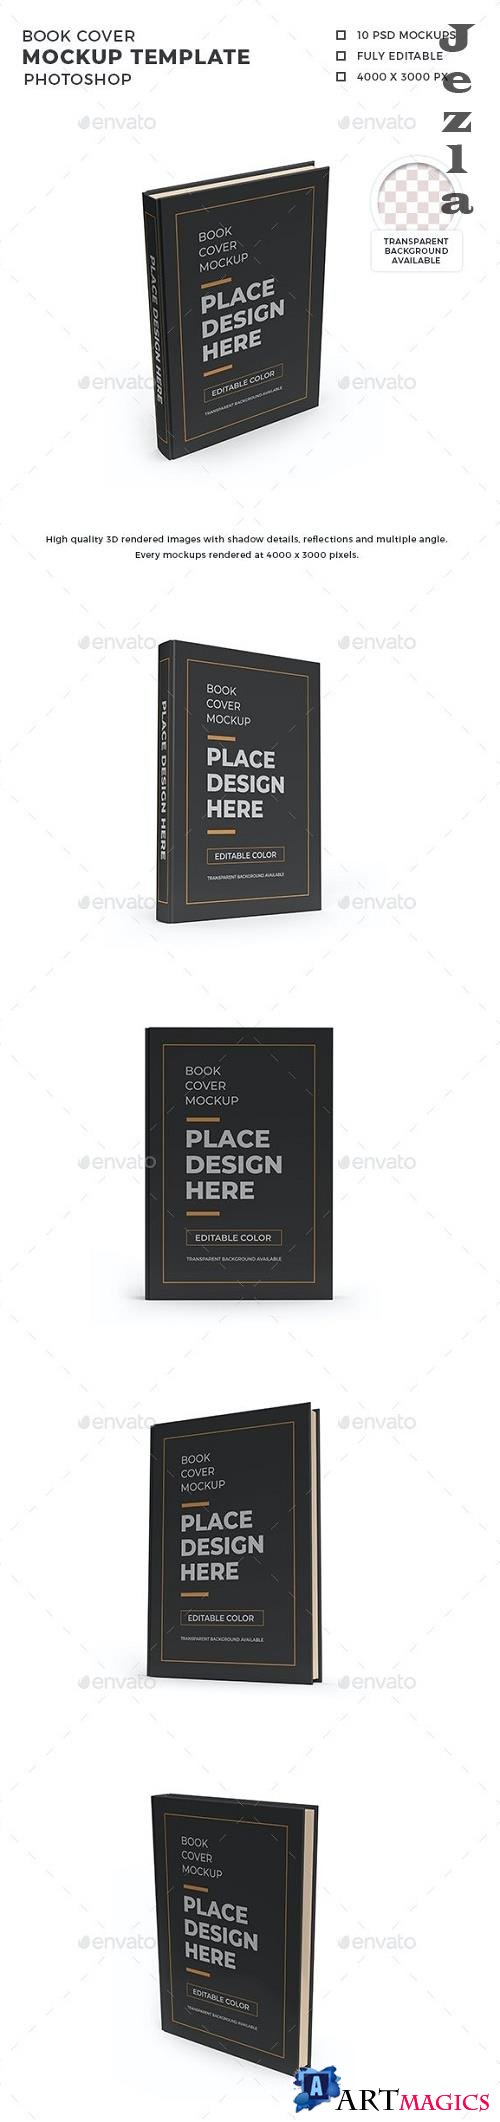 Book Cover 3D Mockup Template - 30816700